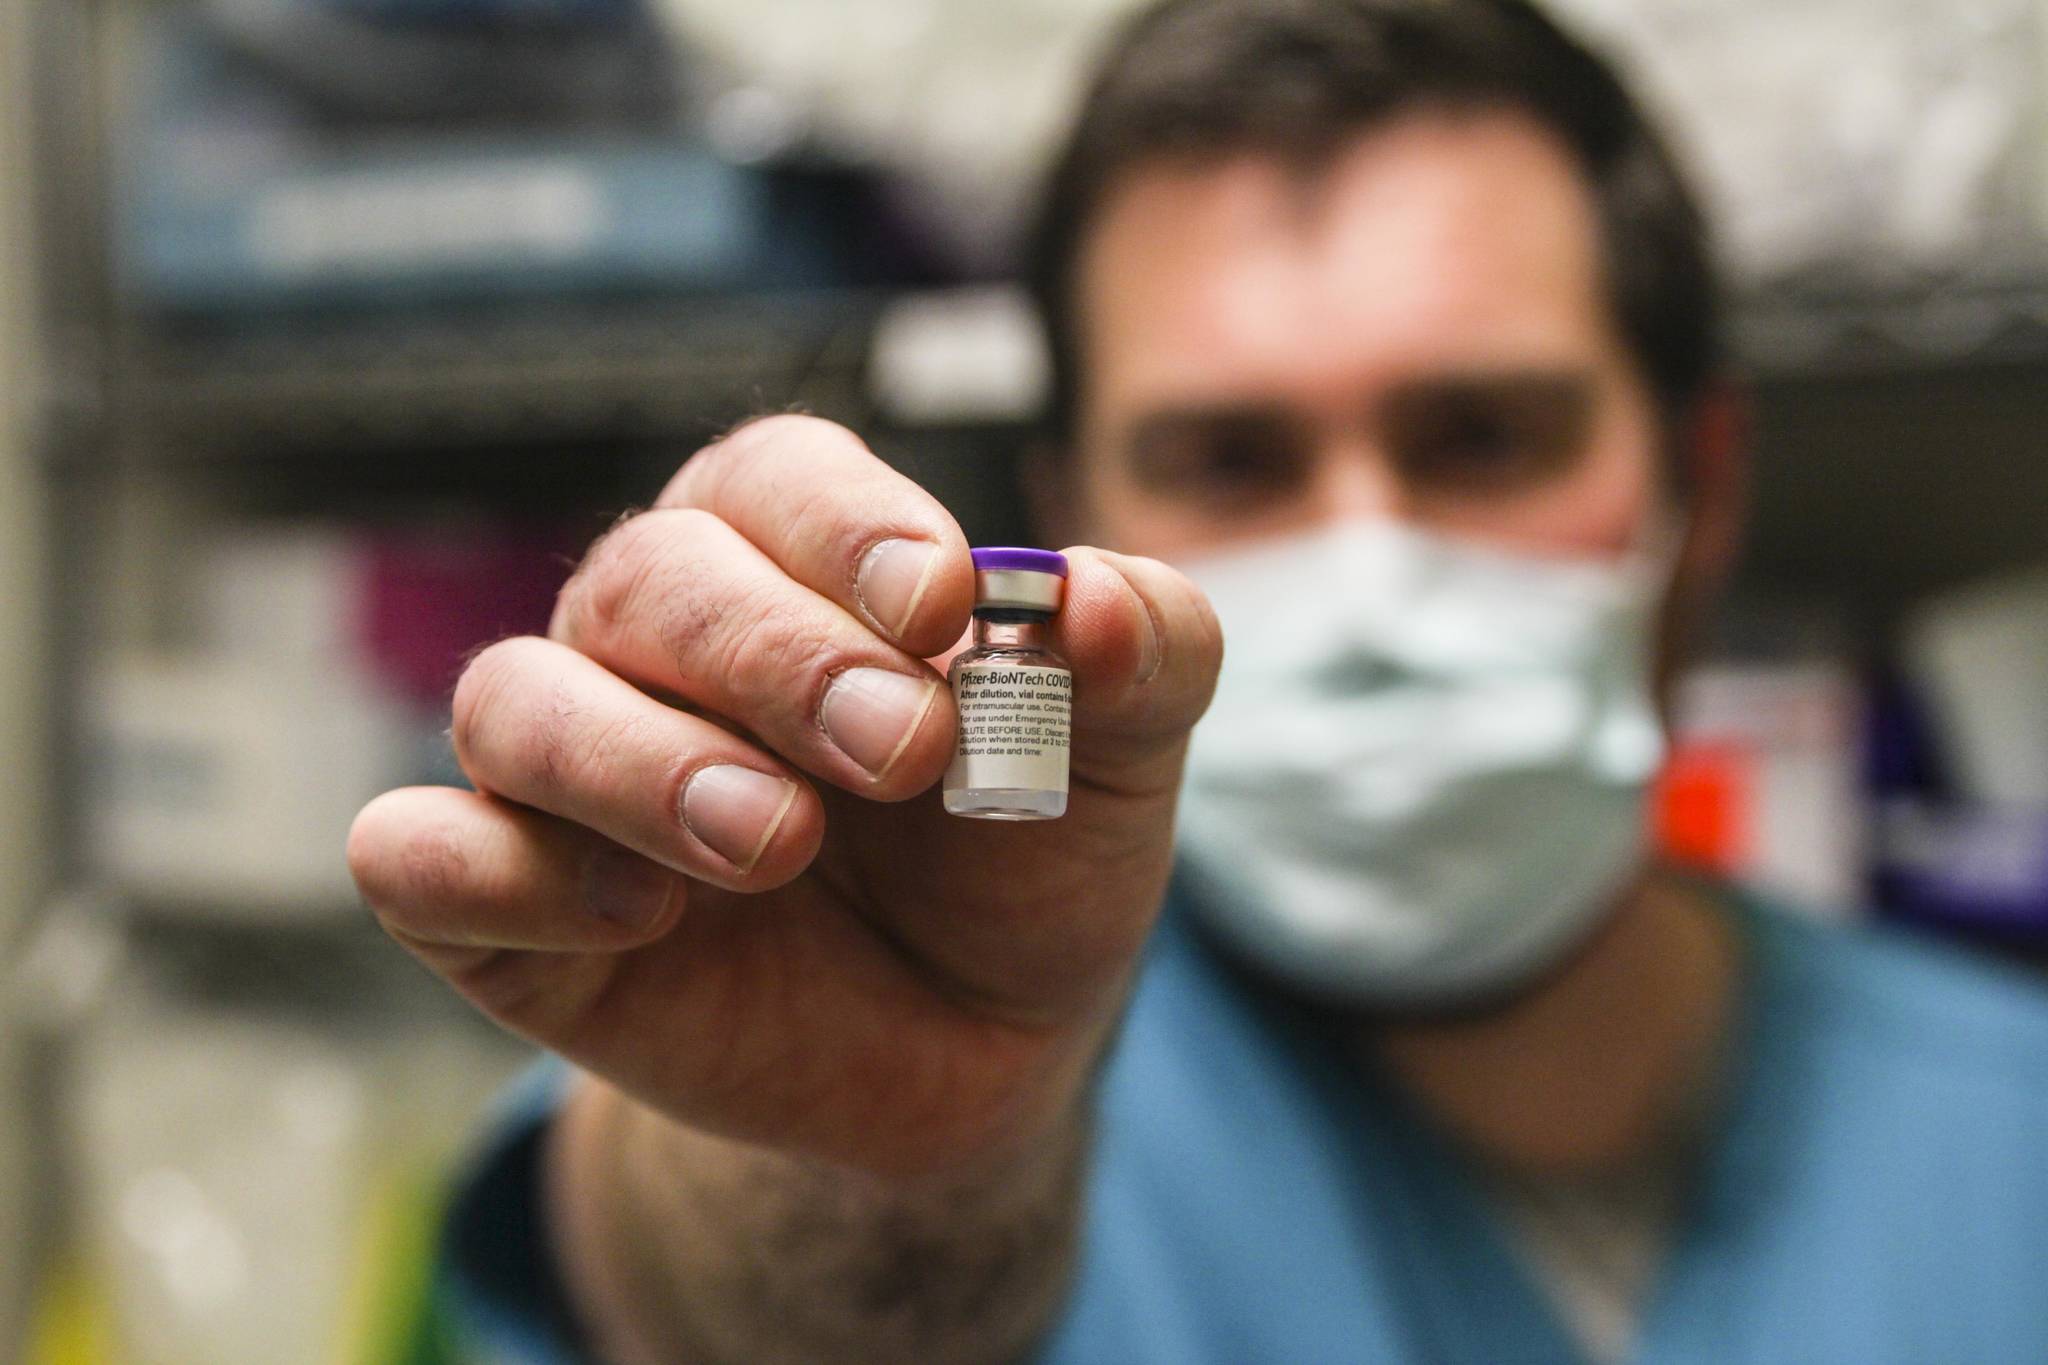 Michael S. Lockett / Juneau Empire
Bartlett Regional Hospital pharmacist Chris Sperry holds a vial of COVID-19 vaccine on Dec. 15, 2020. BRH immediately began vaccinating its personnel upon receipt of the vaccine.